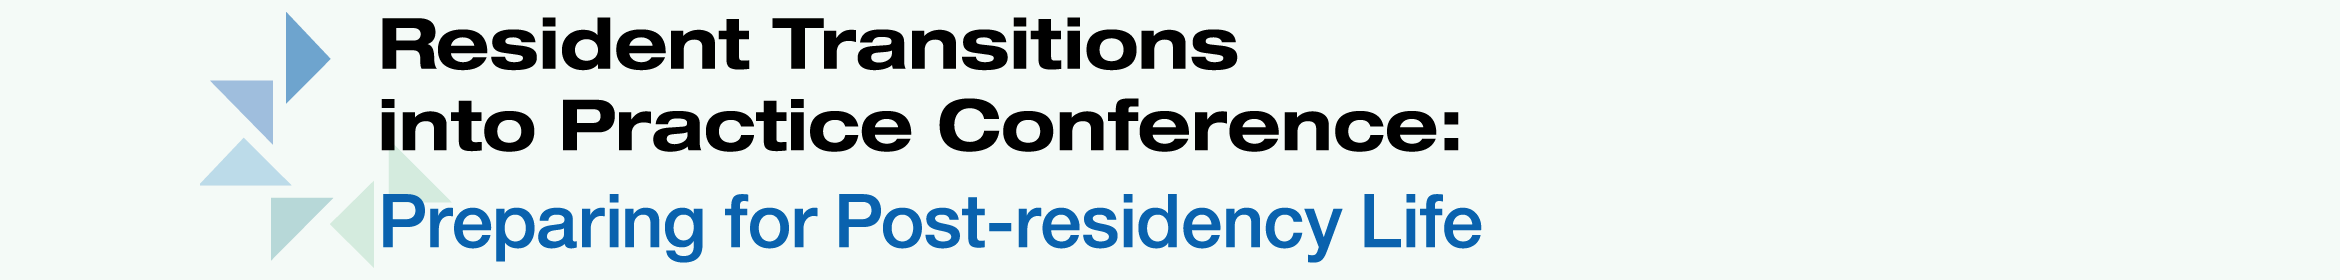 Resident Transitions into Practice Conference: Preparing for Post-residency Main banner